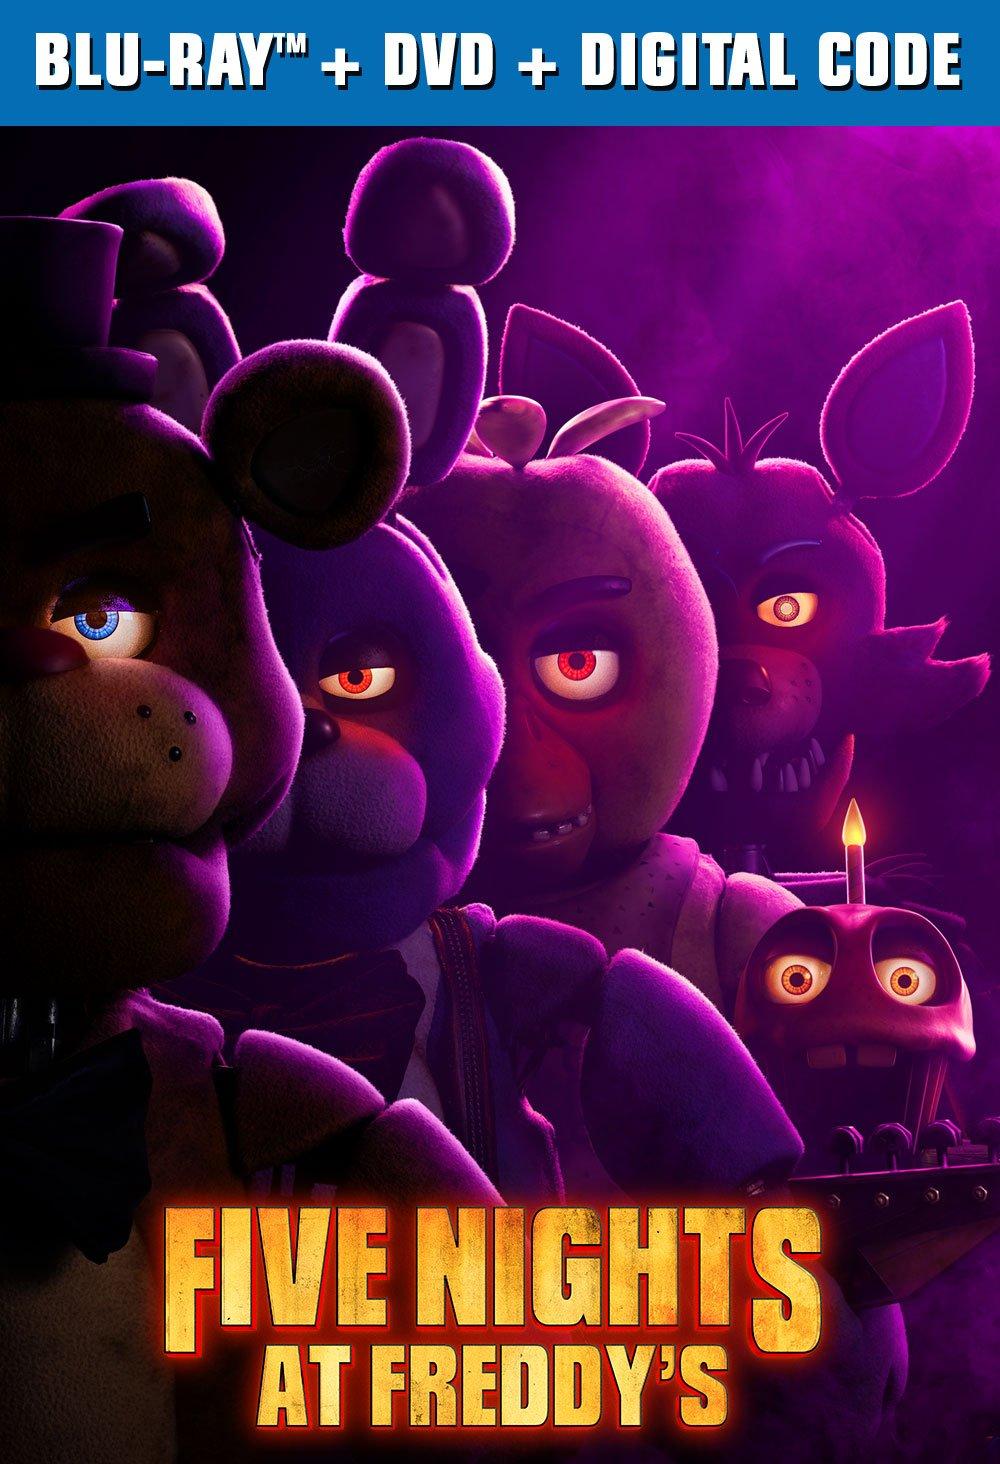 Five Nights at Freddy's - Blu-ray, DVD, and Digital Movie